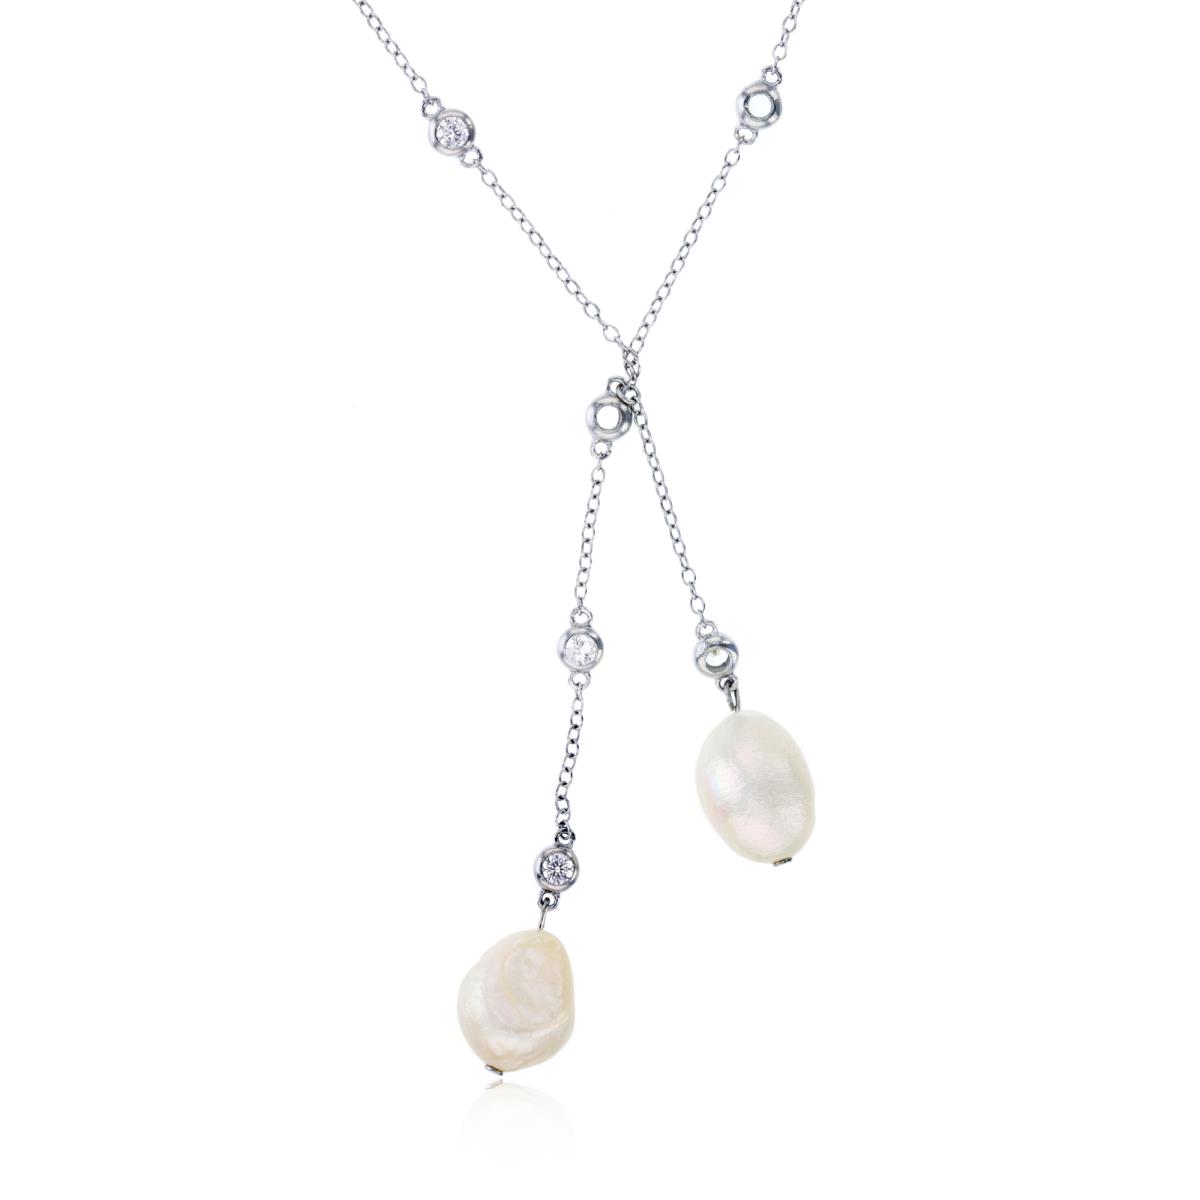 Sterling Silver Rhodium Dangling 11-13mm Fresh Water Pearls & Cr Wh Sapp Station 18"+2" Necklace